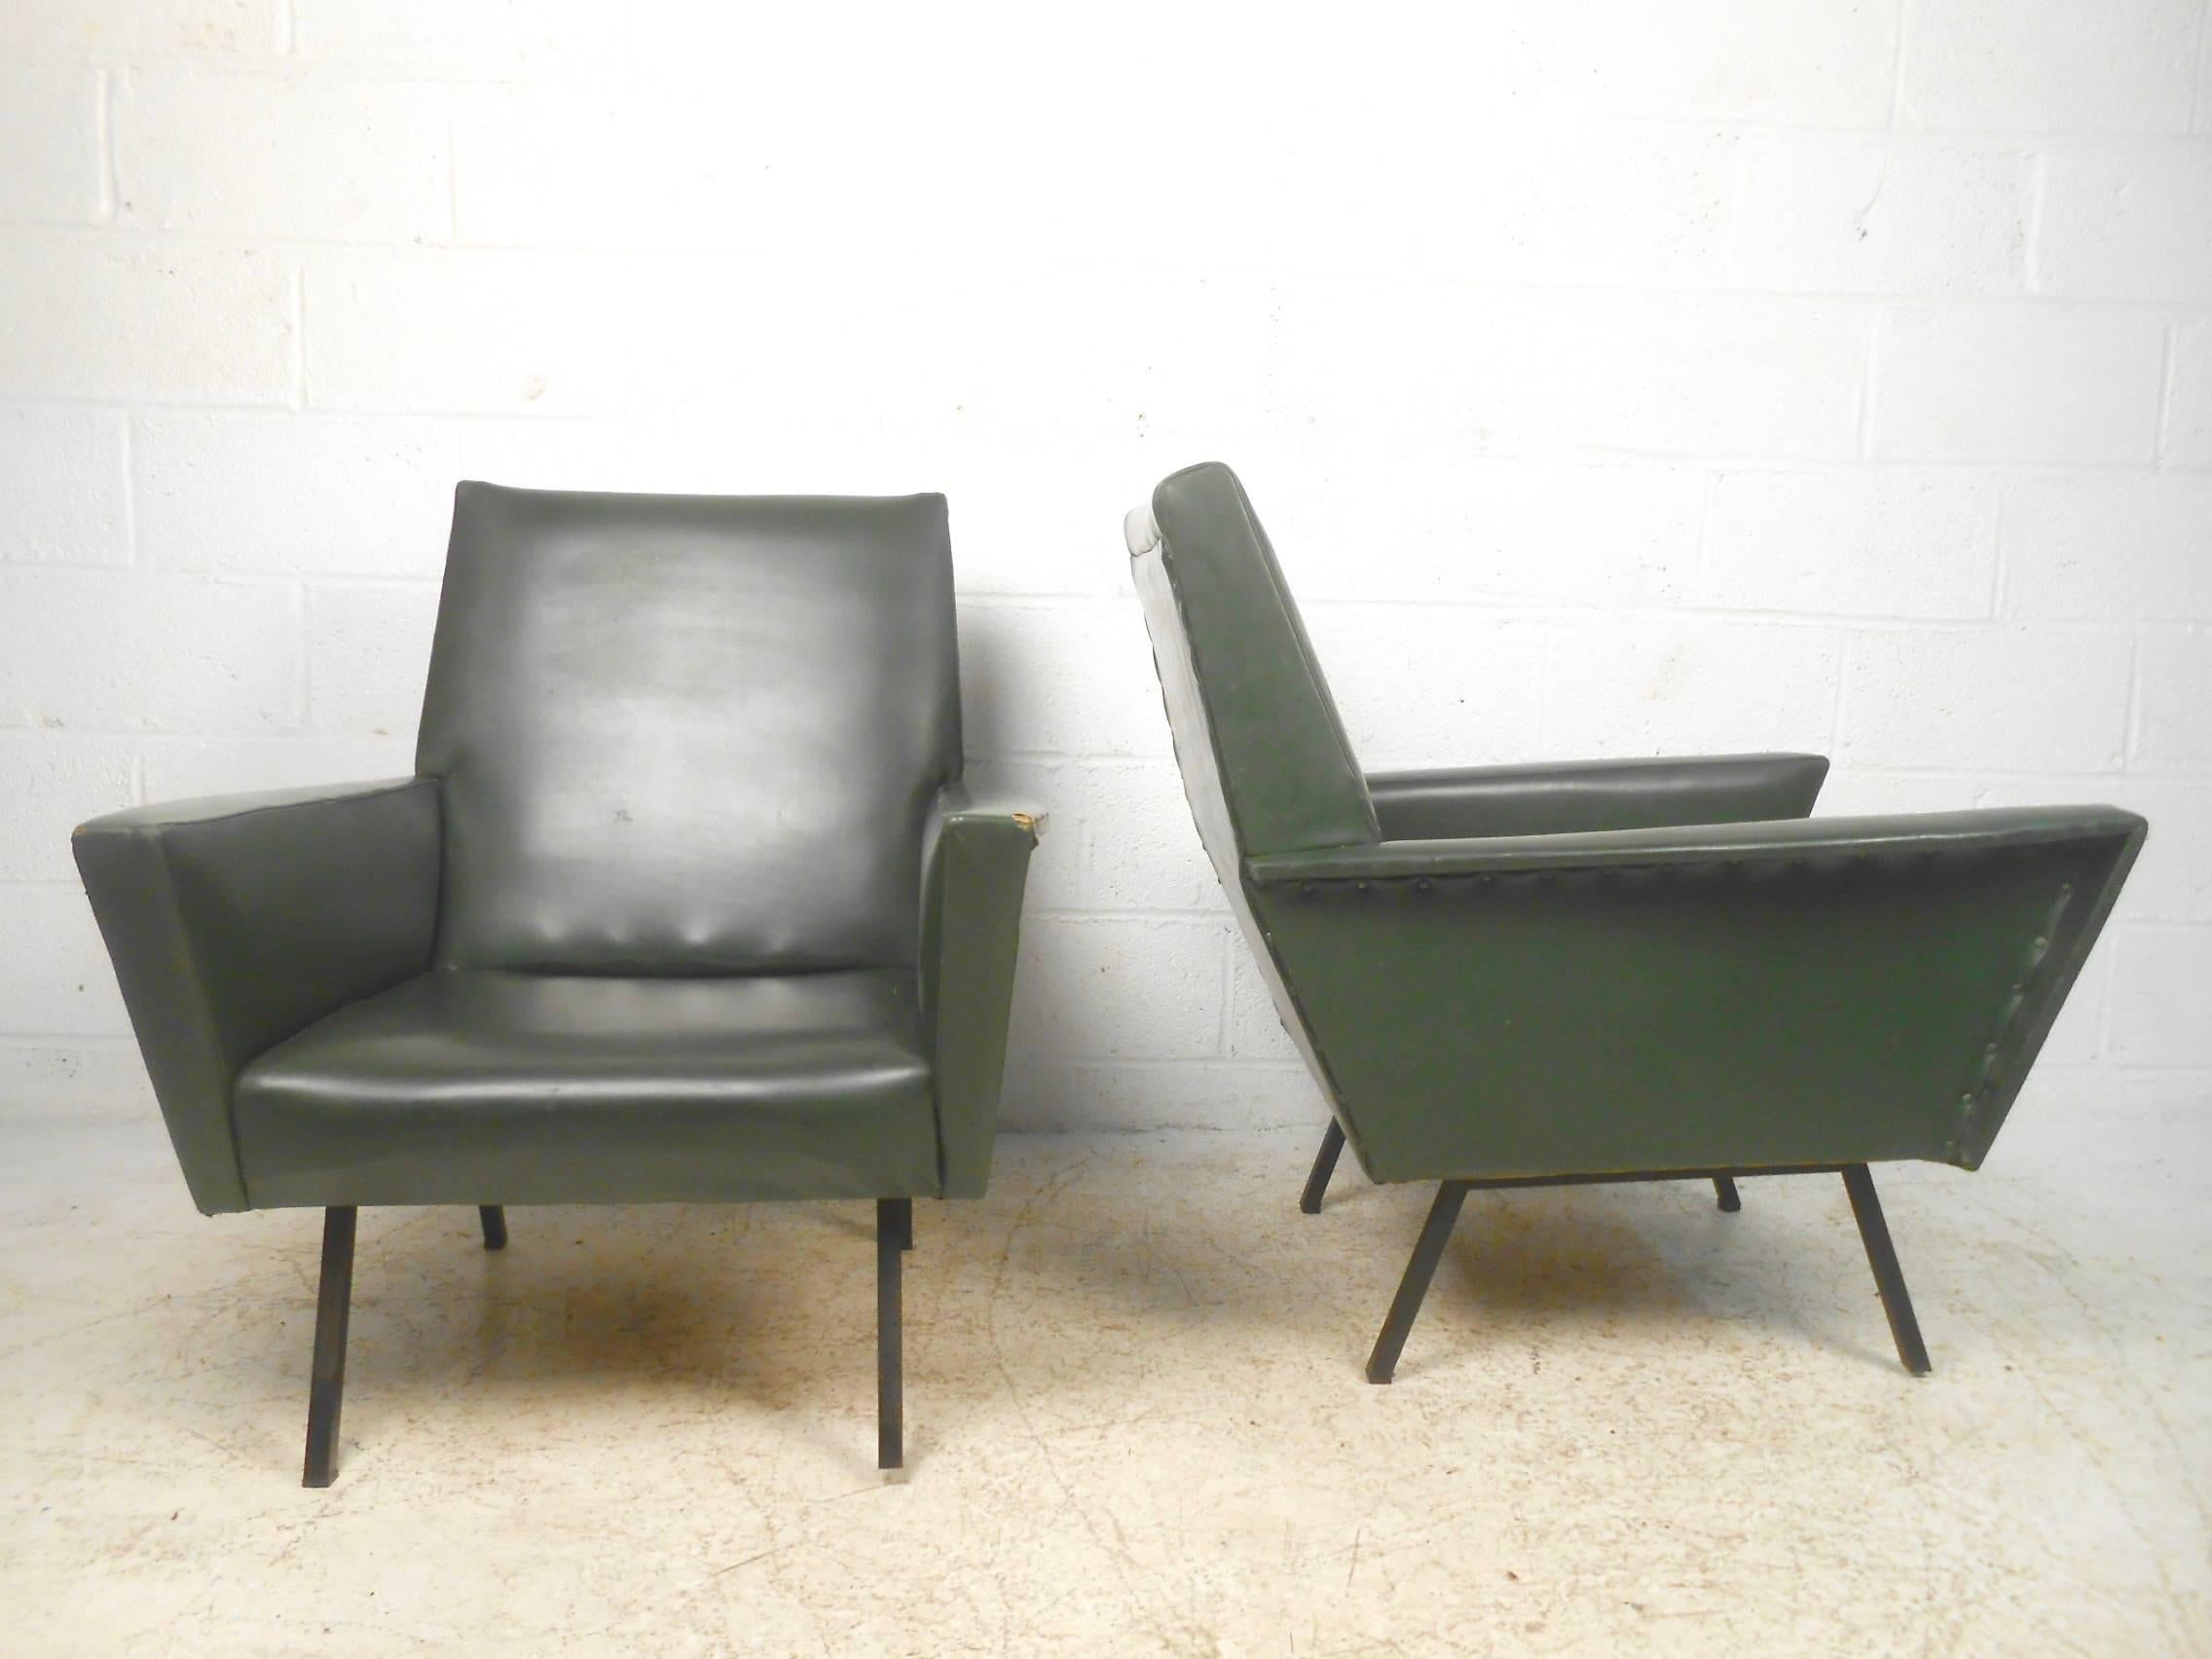 This stylish pair of midcentury lounge chairs feature vintage Danish modern design and include sturdy metal legs, winged arm rests, and high back seats upholstered in vinyl. Elegant and statuesque pair of high back Scandinavian style lounge chairs